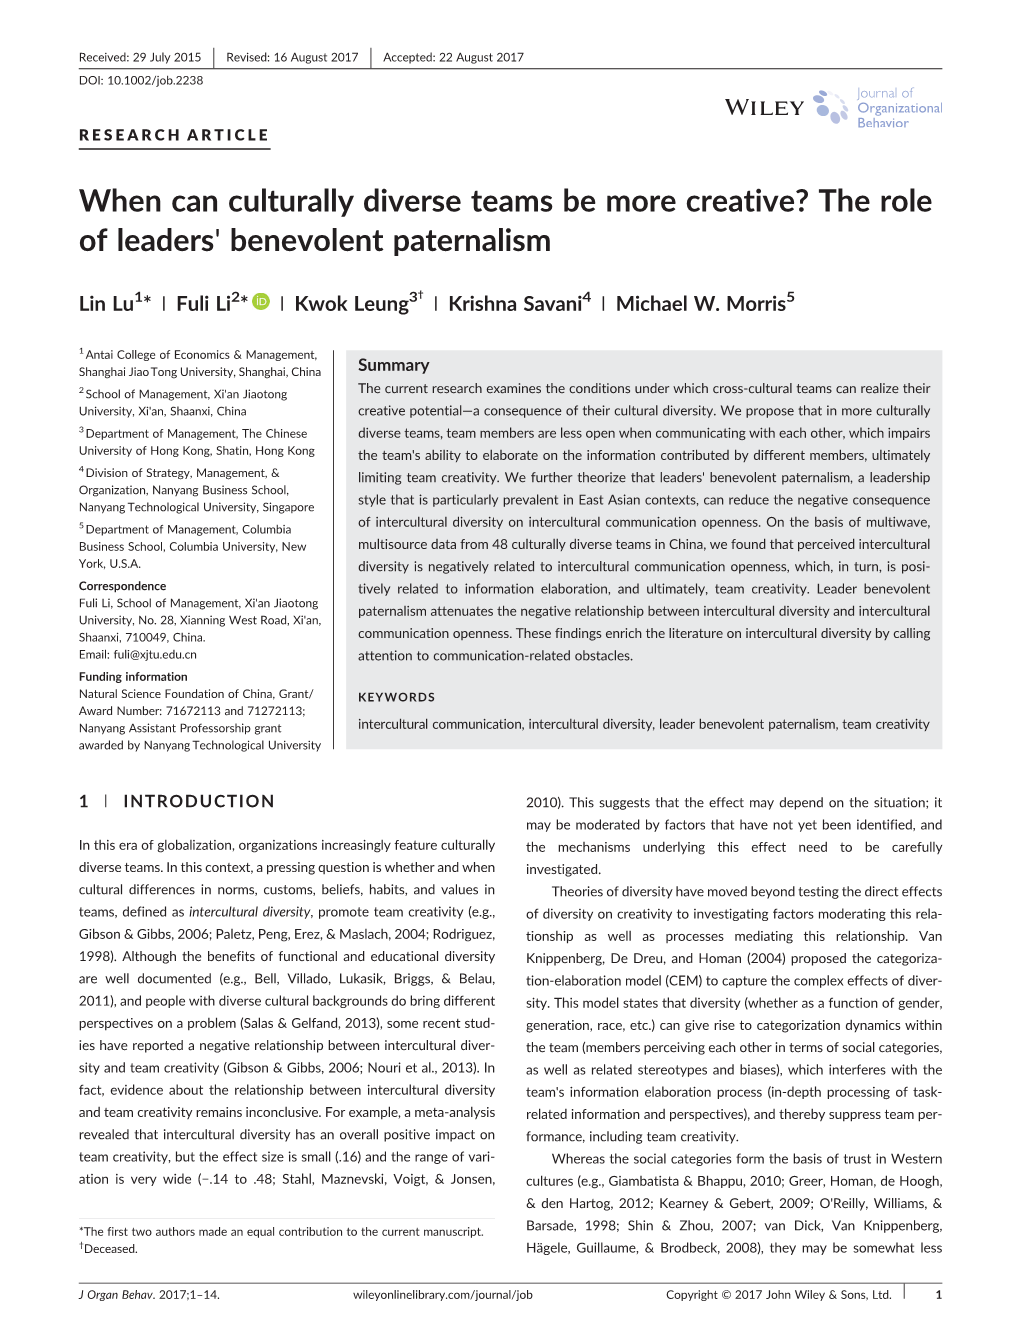 When Can Culturally Diverse Teams Be More Creative? the Role of Leaders' Benevolent Paternalism